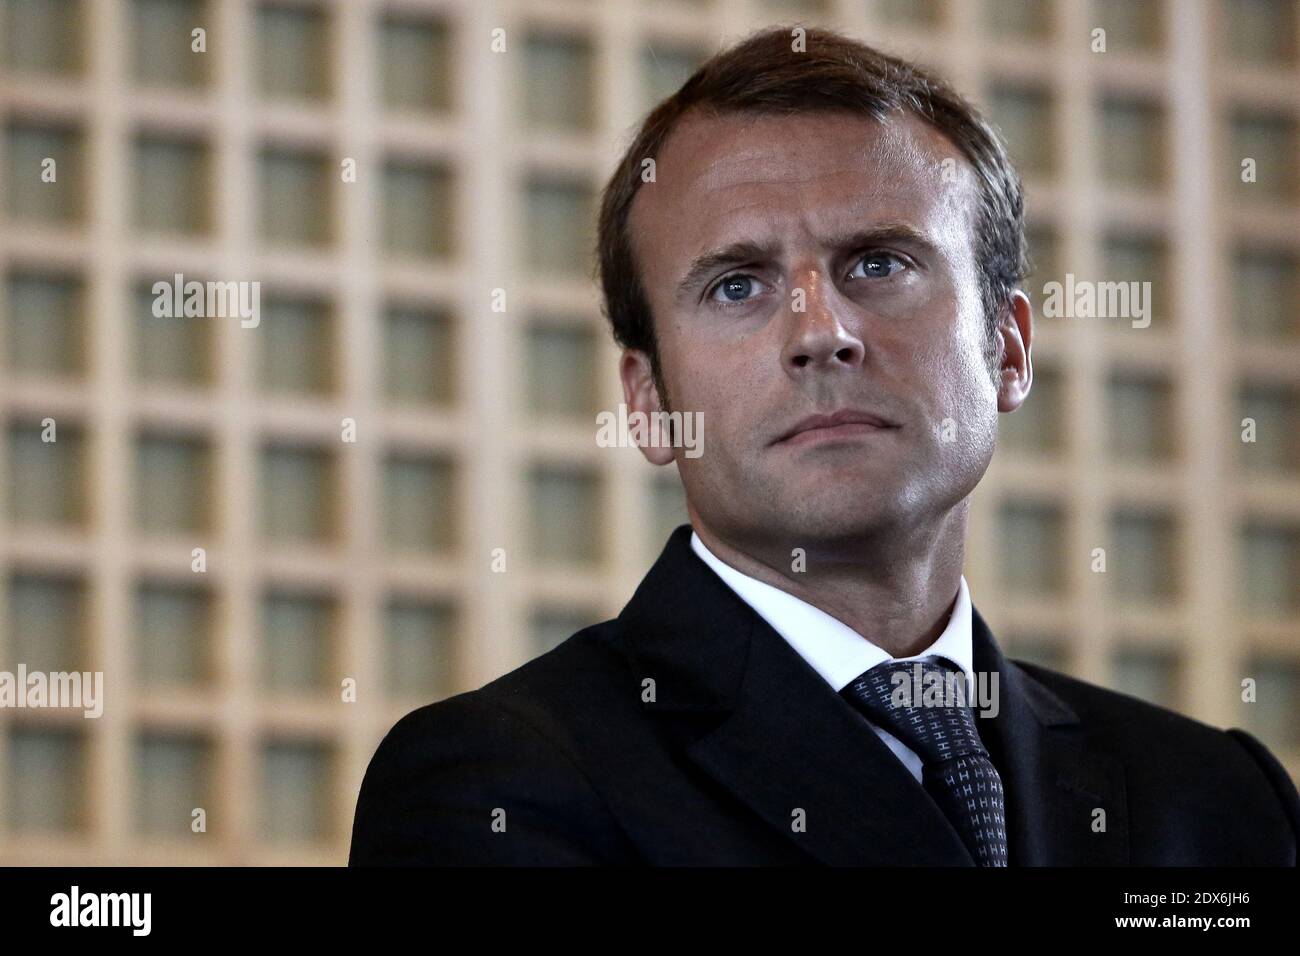 Newly appointed successor Emmanuel Macron, a 36-year-old ex-Rothschild banker and architect of the president's economic policy, during a handover cermony in Paris, France on August 27, 2014 at the Economy Ministry. Photo by Stephane Lemouton/ABACAPRESS.COM Stock Photo